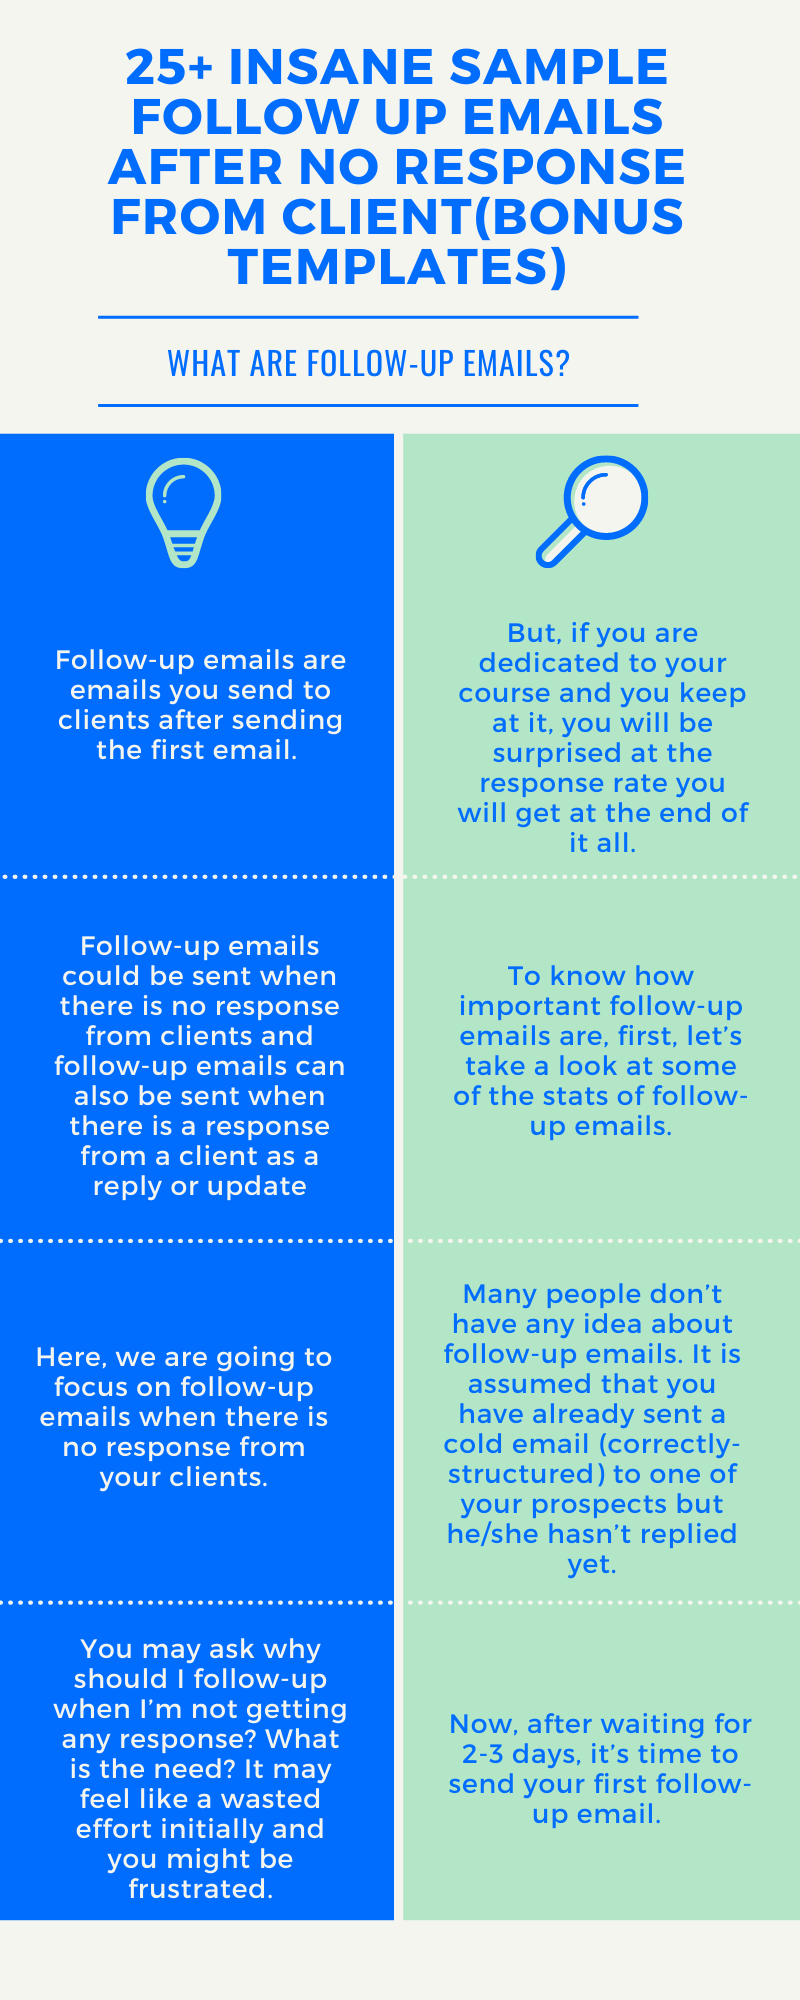 What are Follow-up Emails?